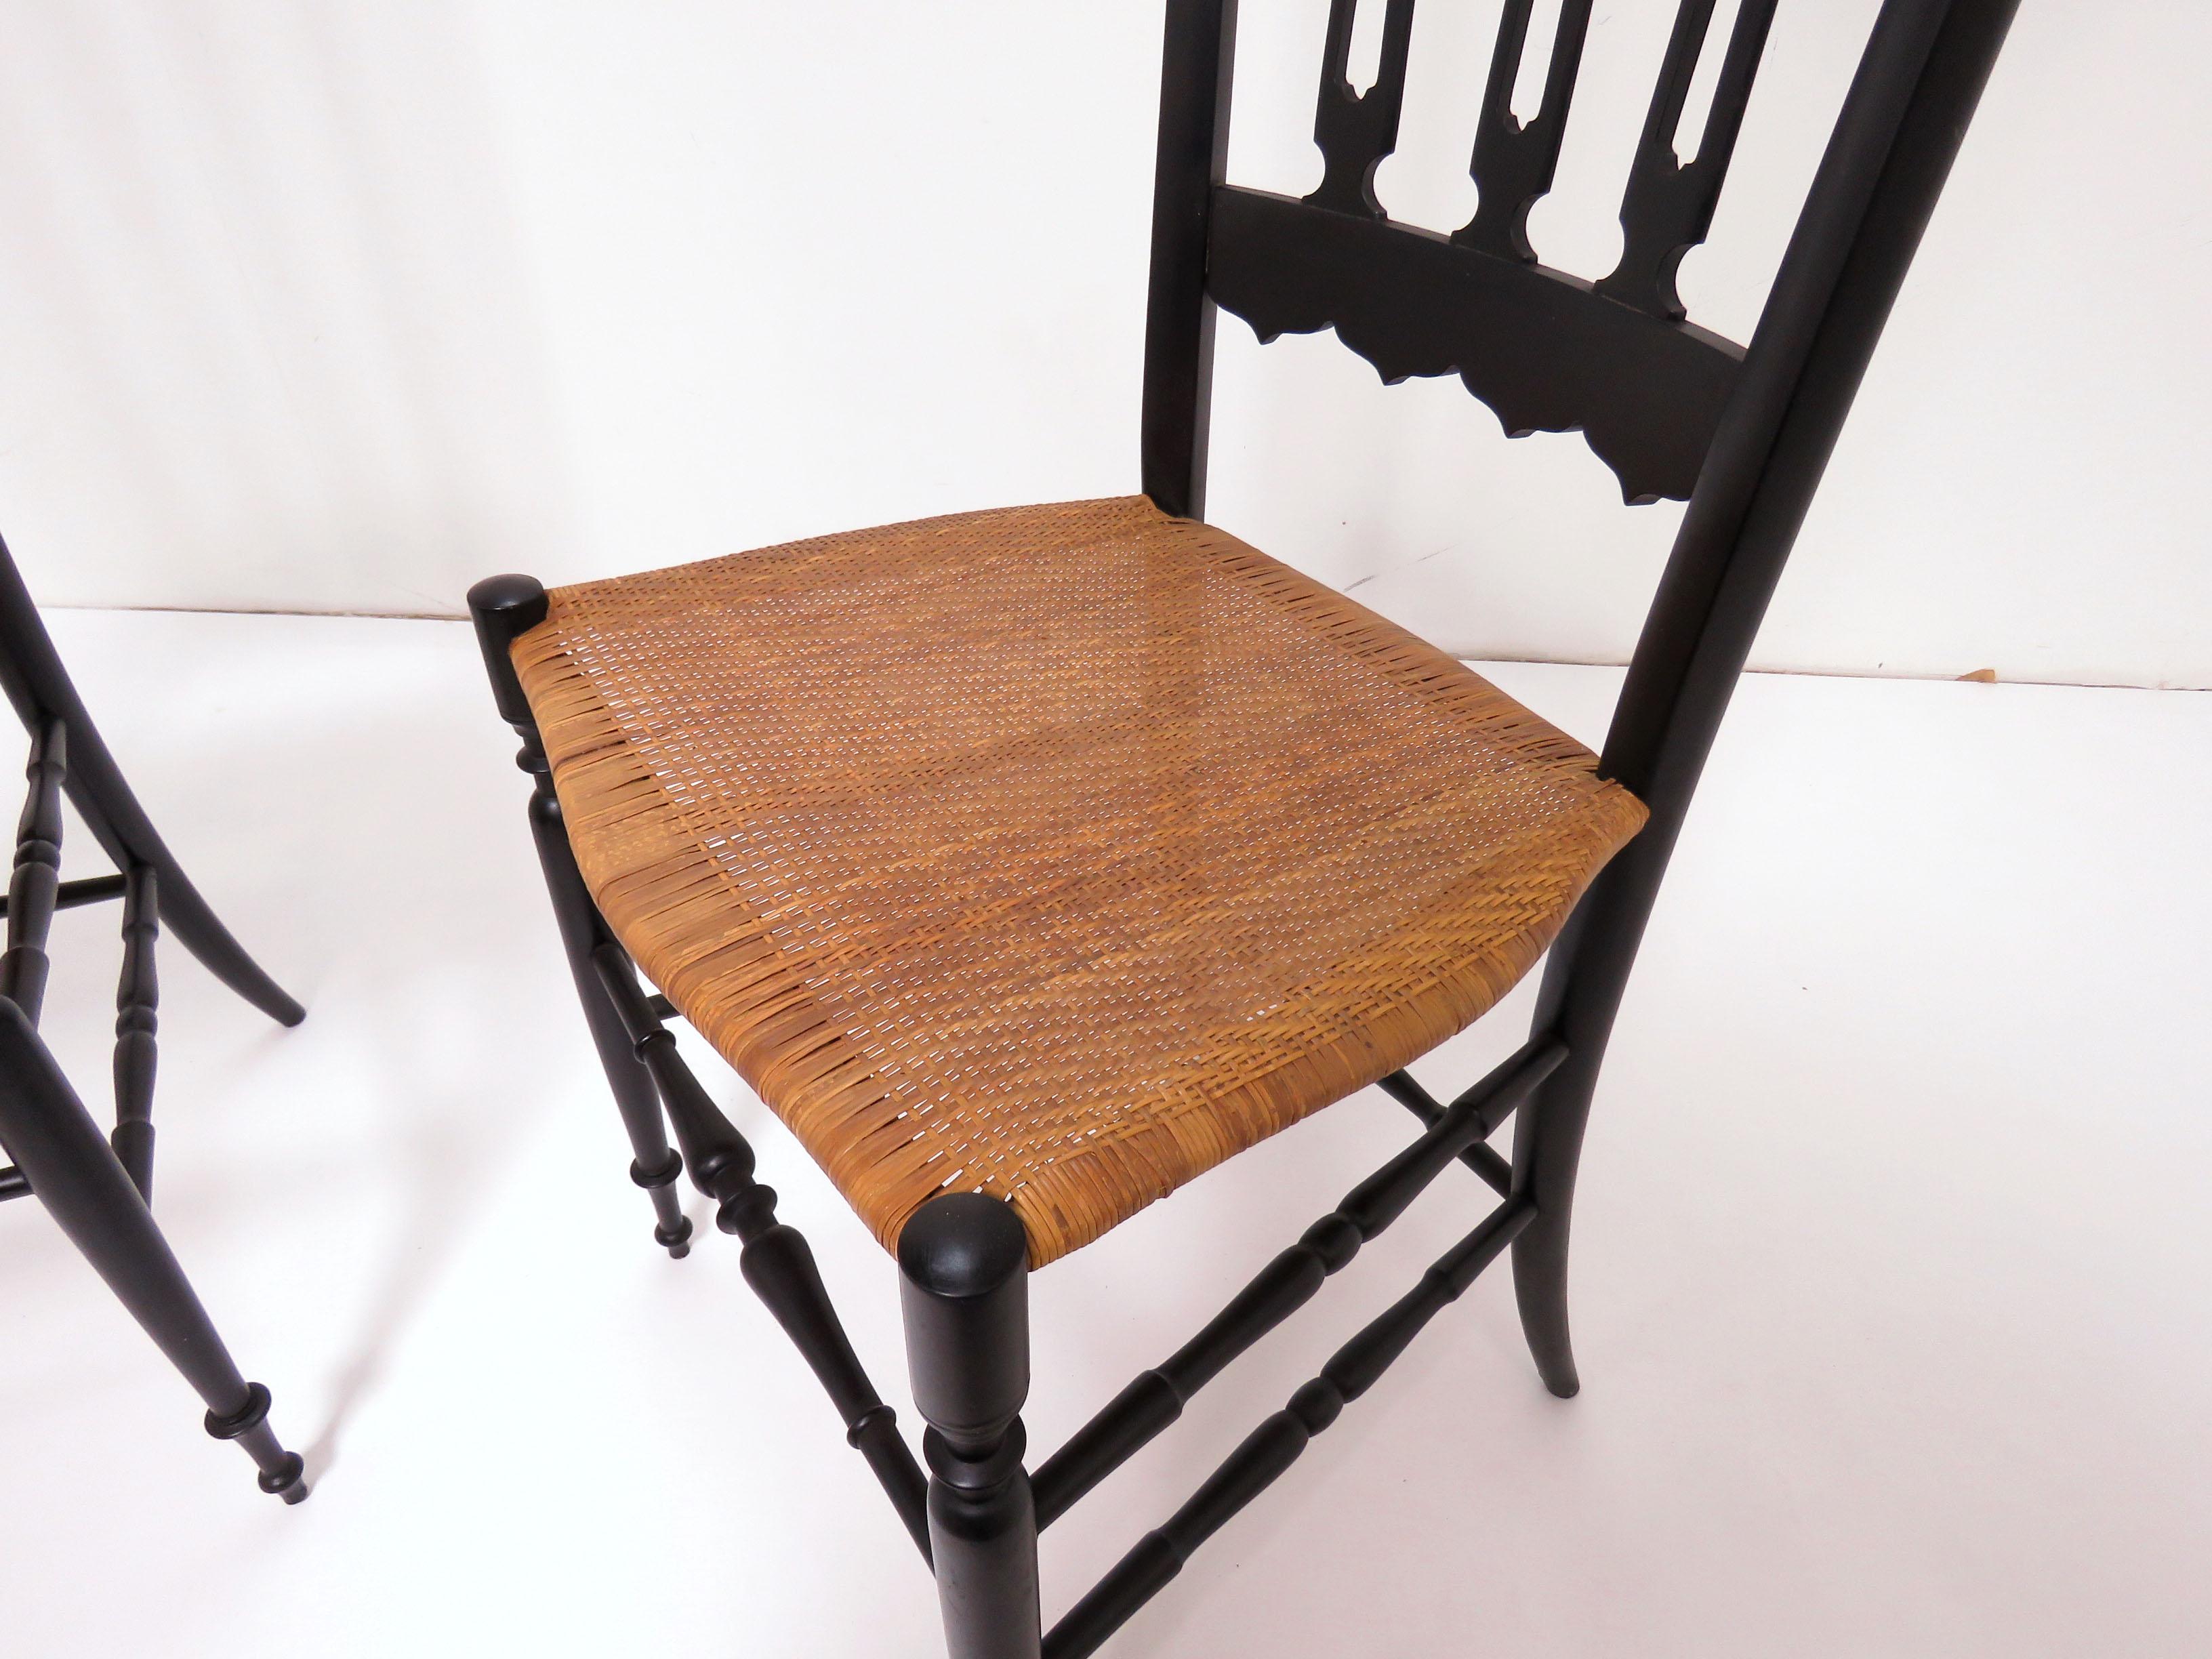 Wood Pair of Chiavari High Back Chairs in Black Lacquer and Cane, circa 1960s